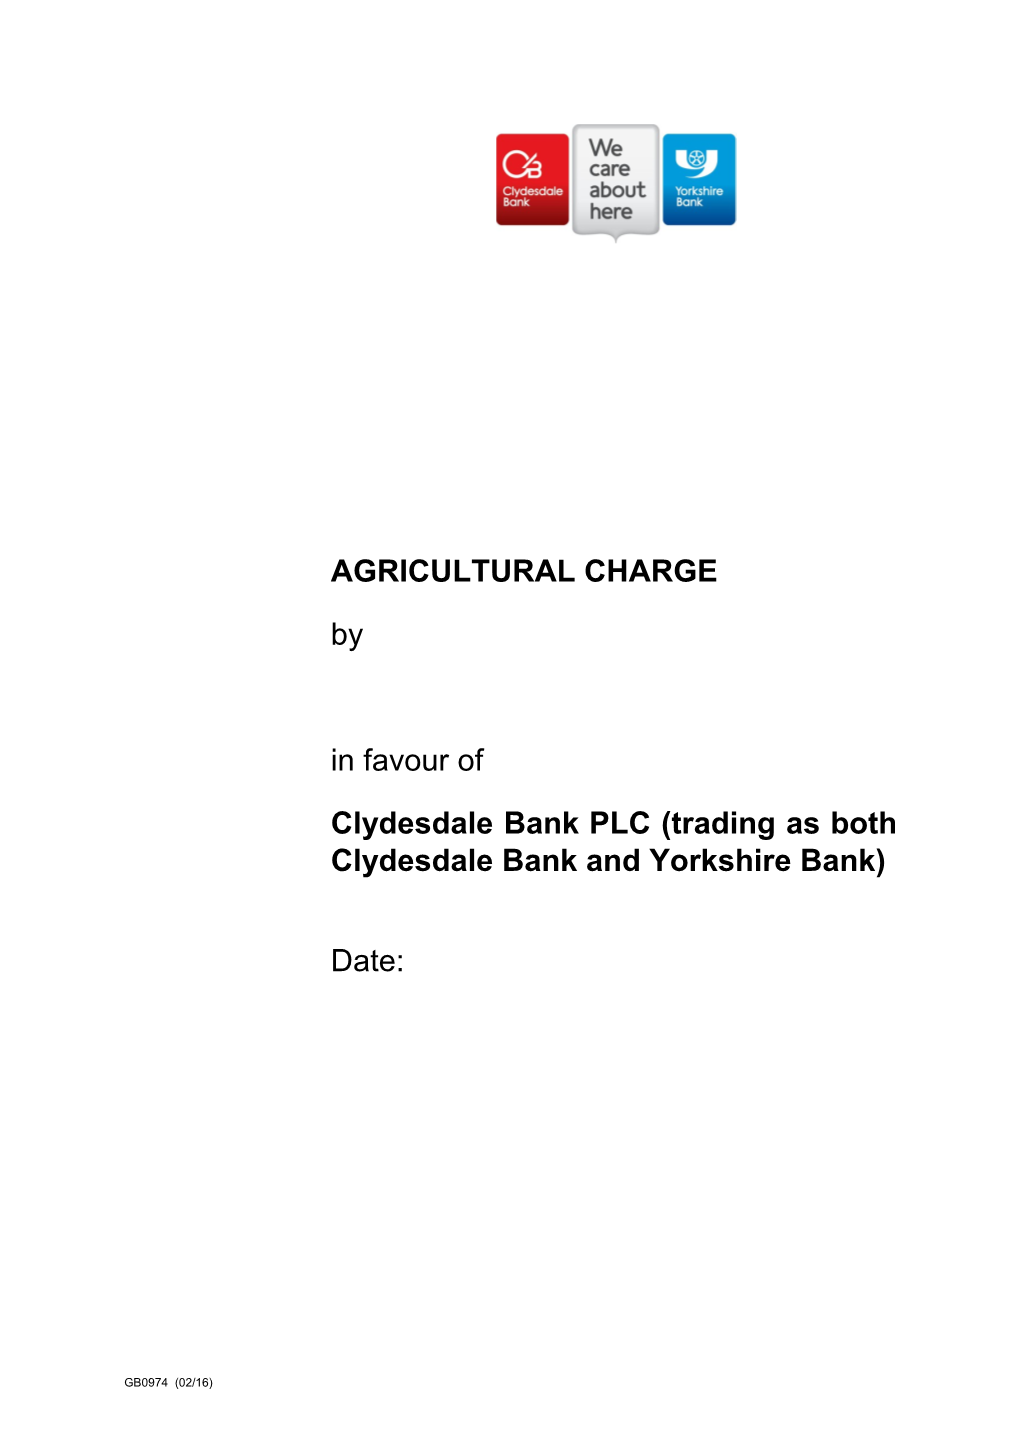 Clydesdale Bank PLC (Trading As Both Clydesdale Bank and Yorkshire Bank)